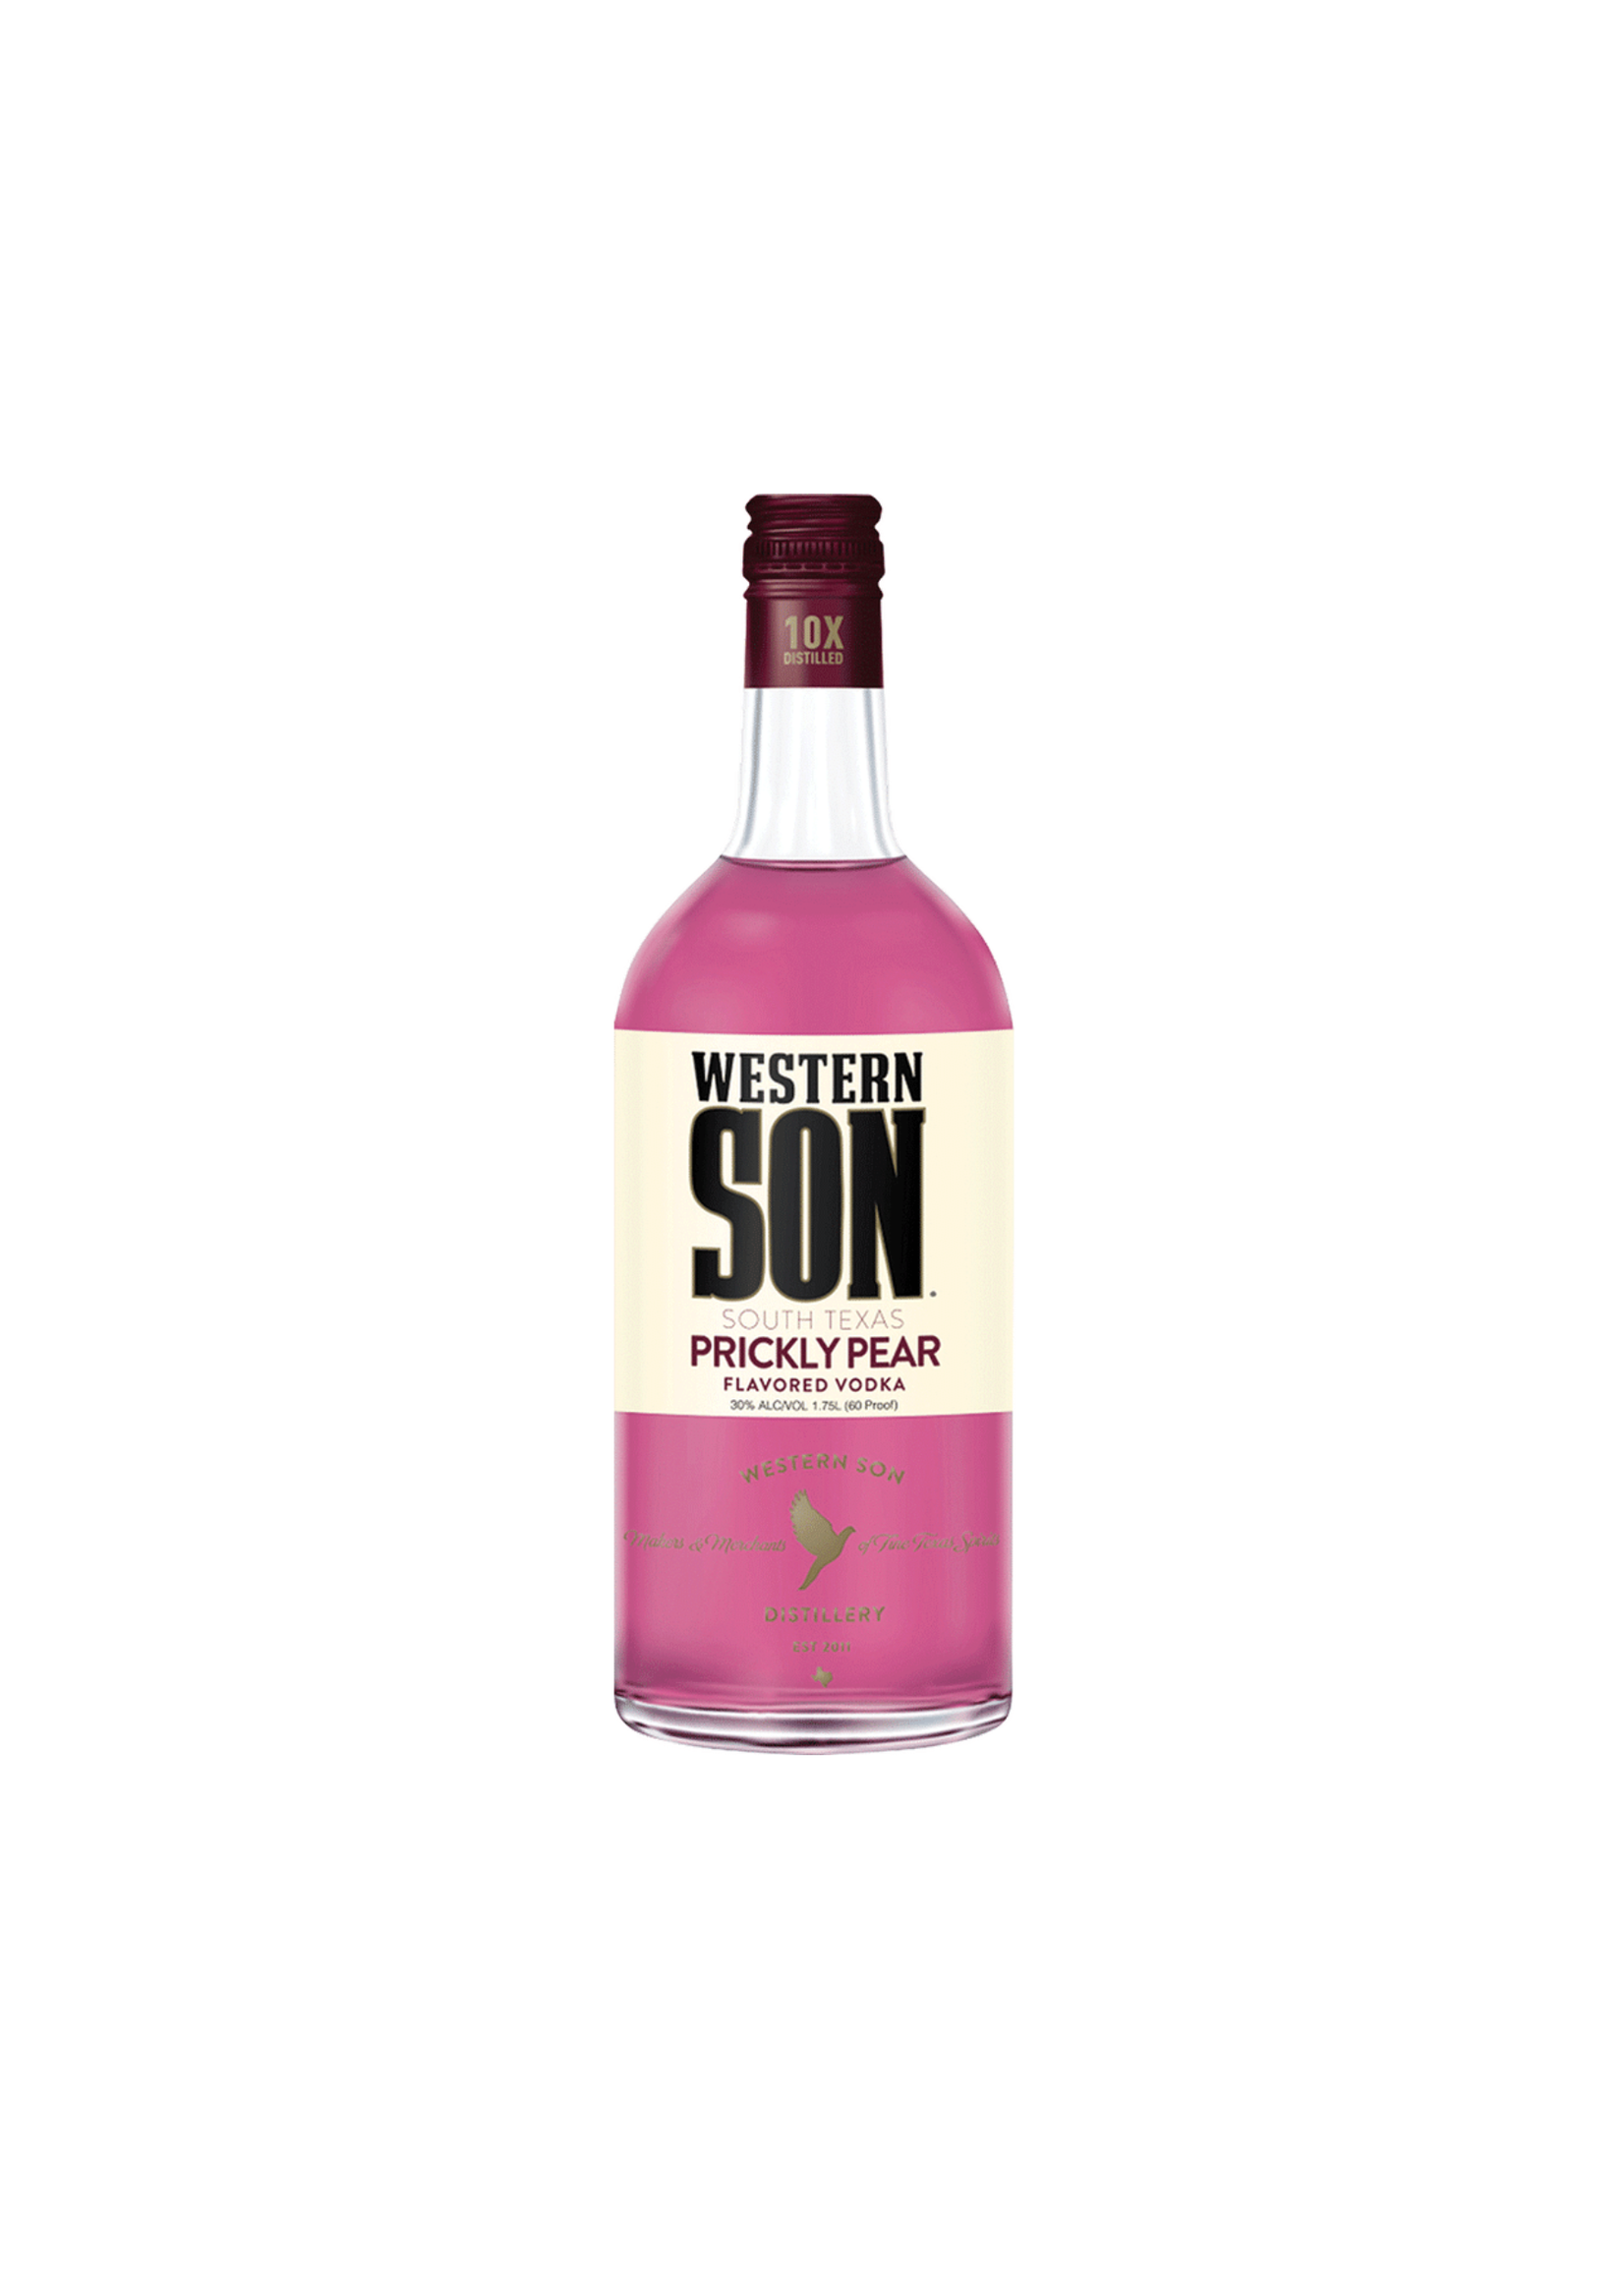 Western Son Western Son Prickly Pear Flavored Vodka 60Proof 1.75 LTR